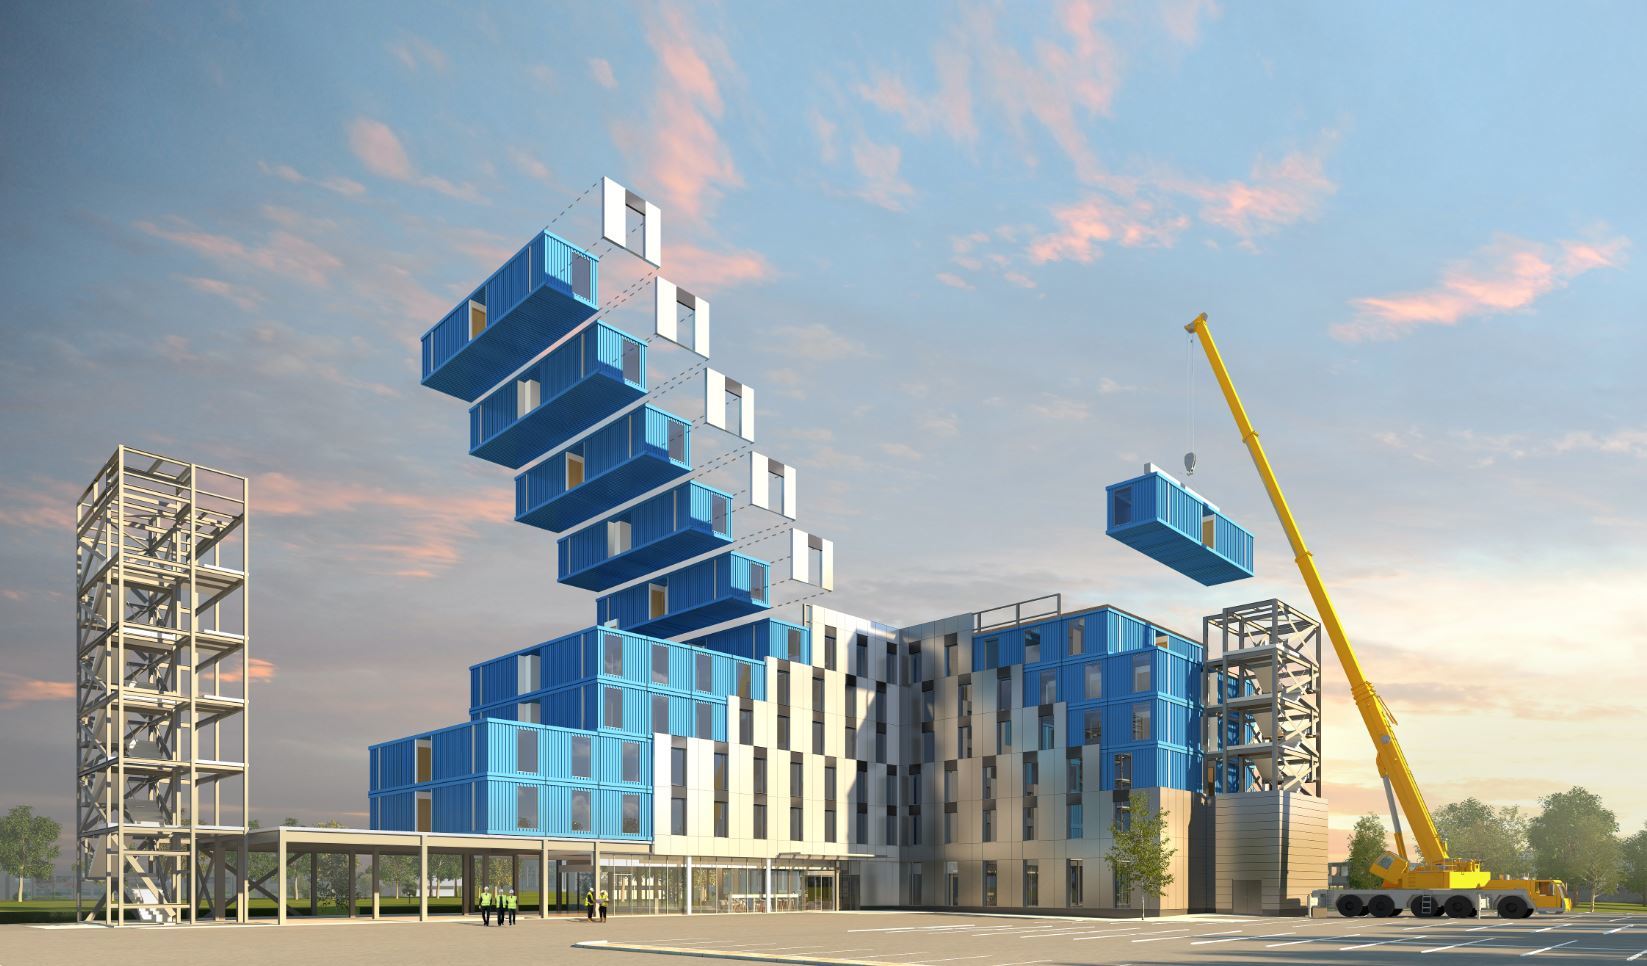 Building the Future Panel by Panel: The Rise of Modular Construction